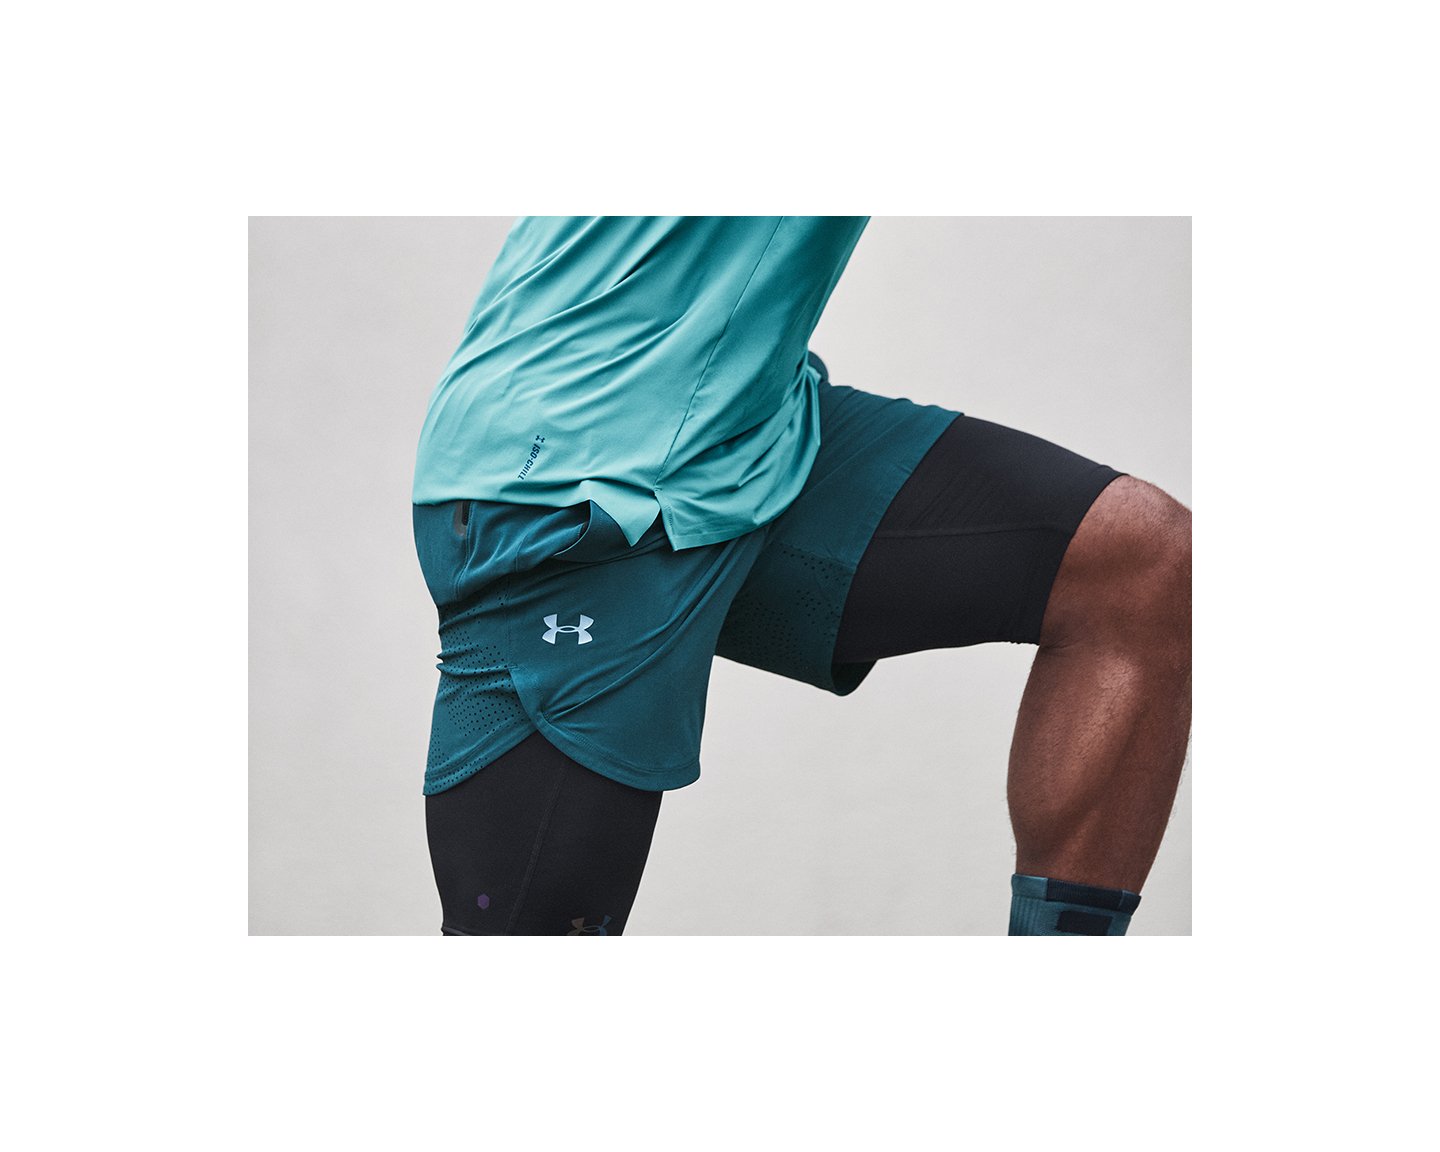 Mens Under Armour Stretch Woven Shorts 7 inch Running Training